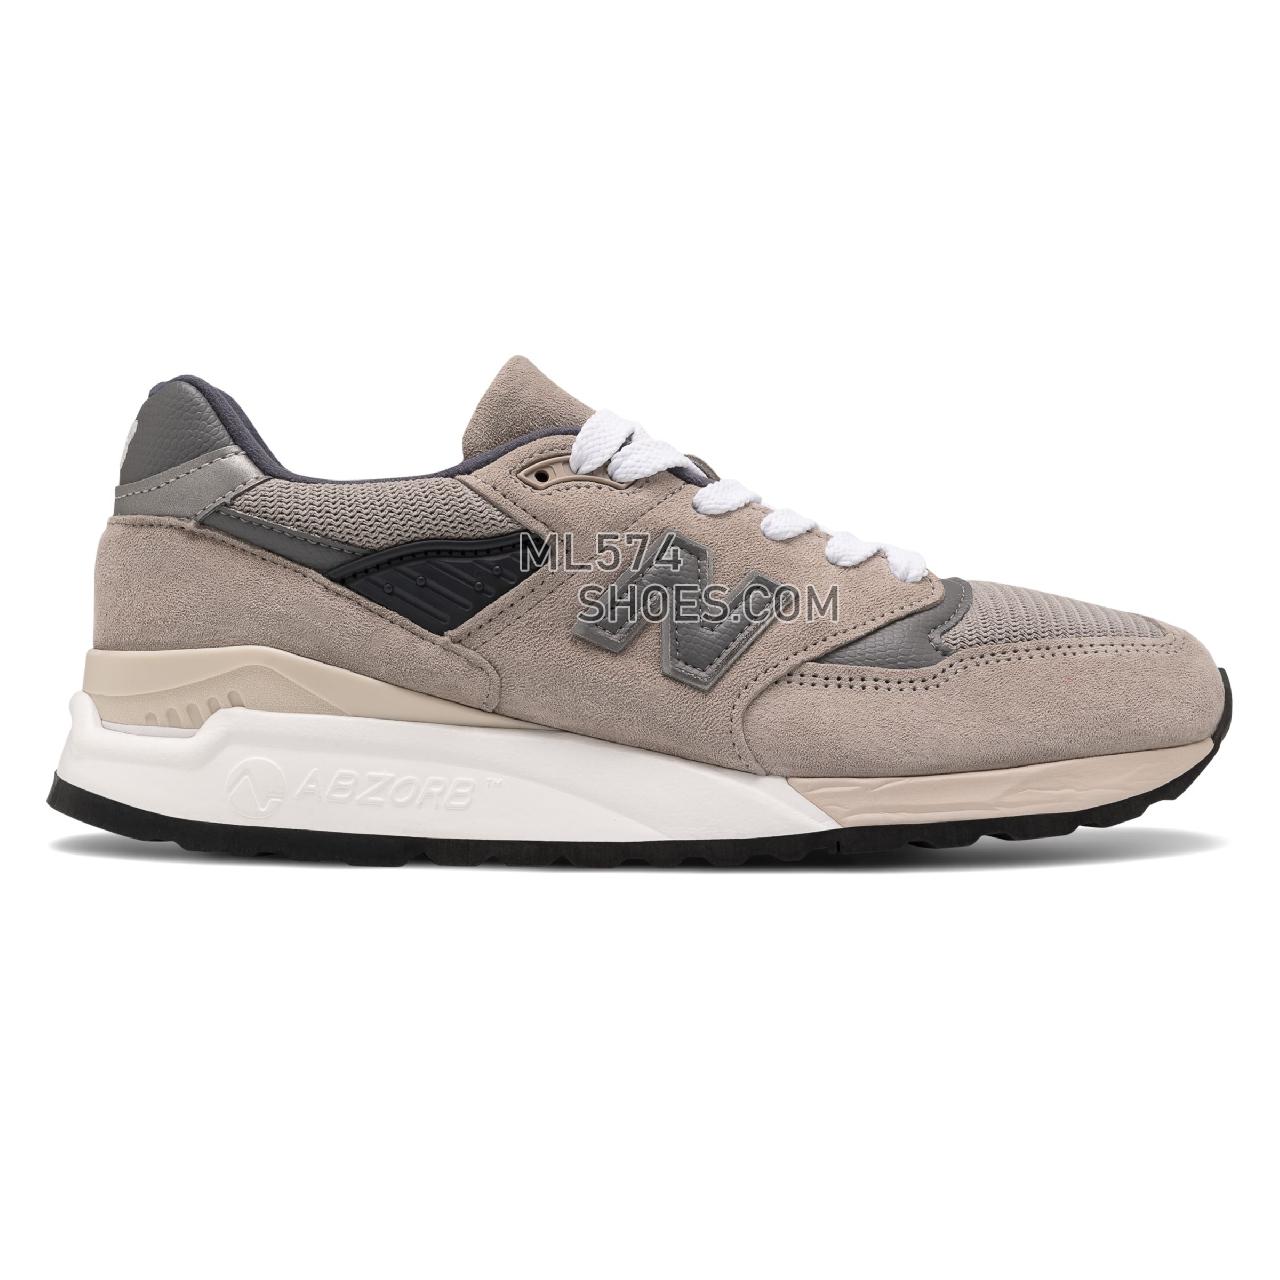 New Balance Made in US 998 - Men's Made in US 998 Classic ML998V1-27545-M - Grey with Light Grey - M998BLA